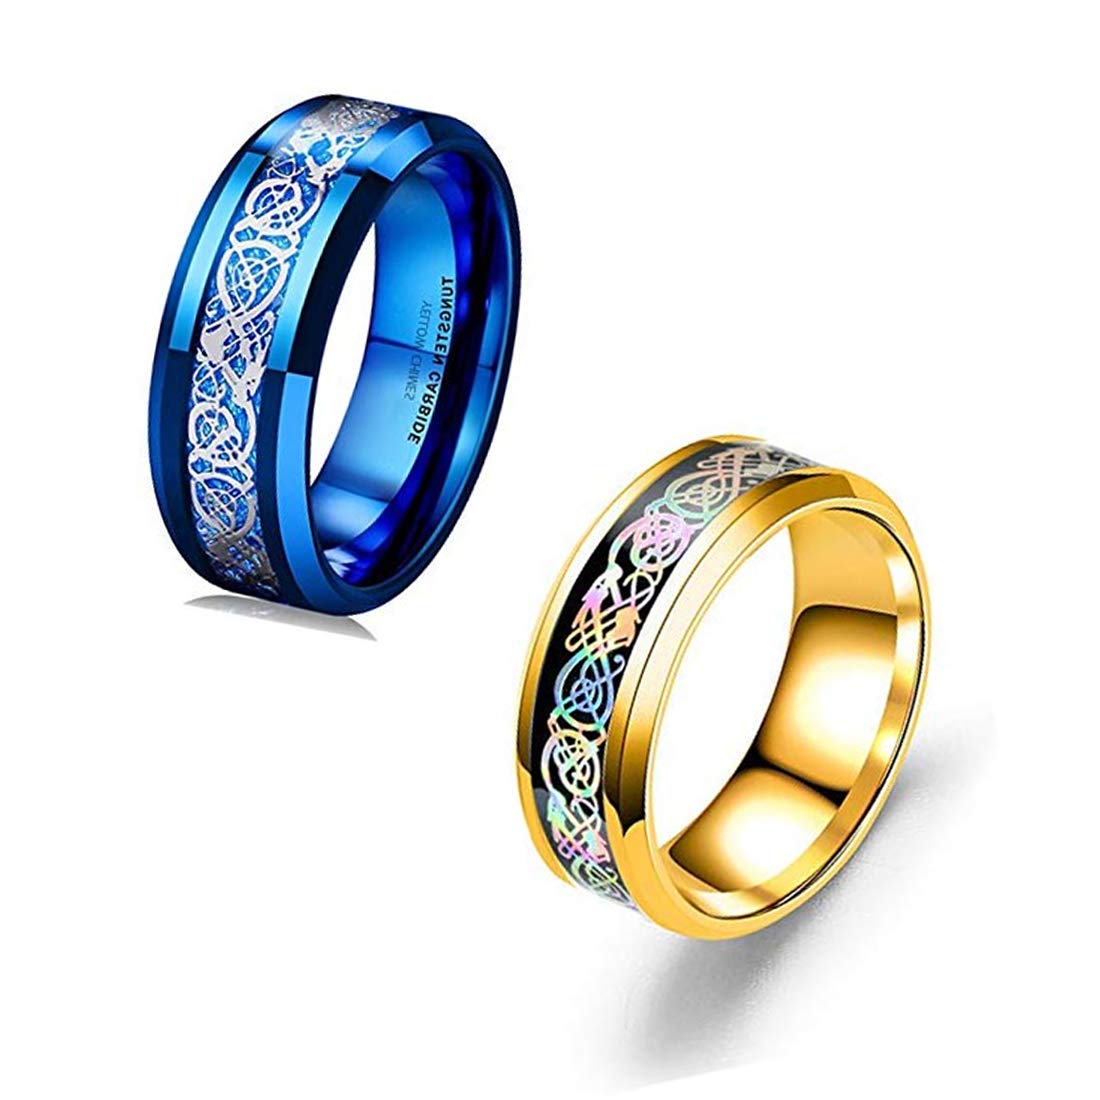 Yellow Chimes Rings for Men Combo of 2 PCs Dragon Celtic Inlay Polish Finish Titanium Steel Rings for Men and Boys.